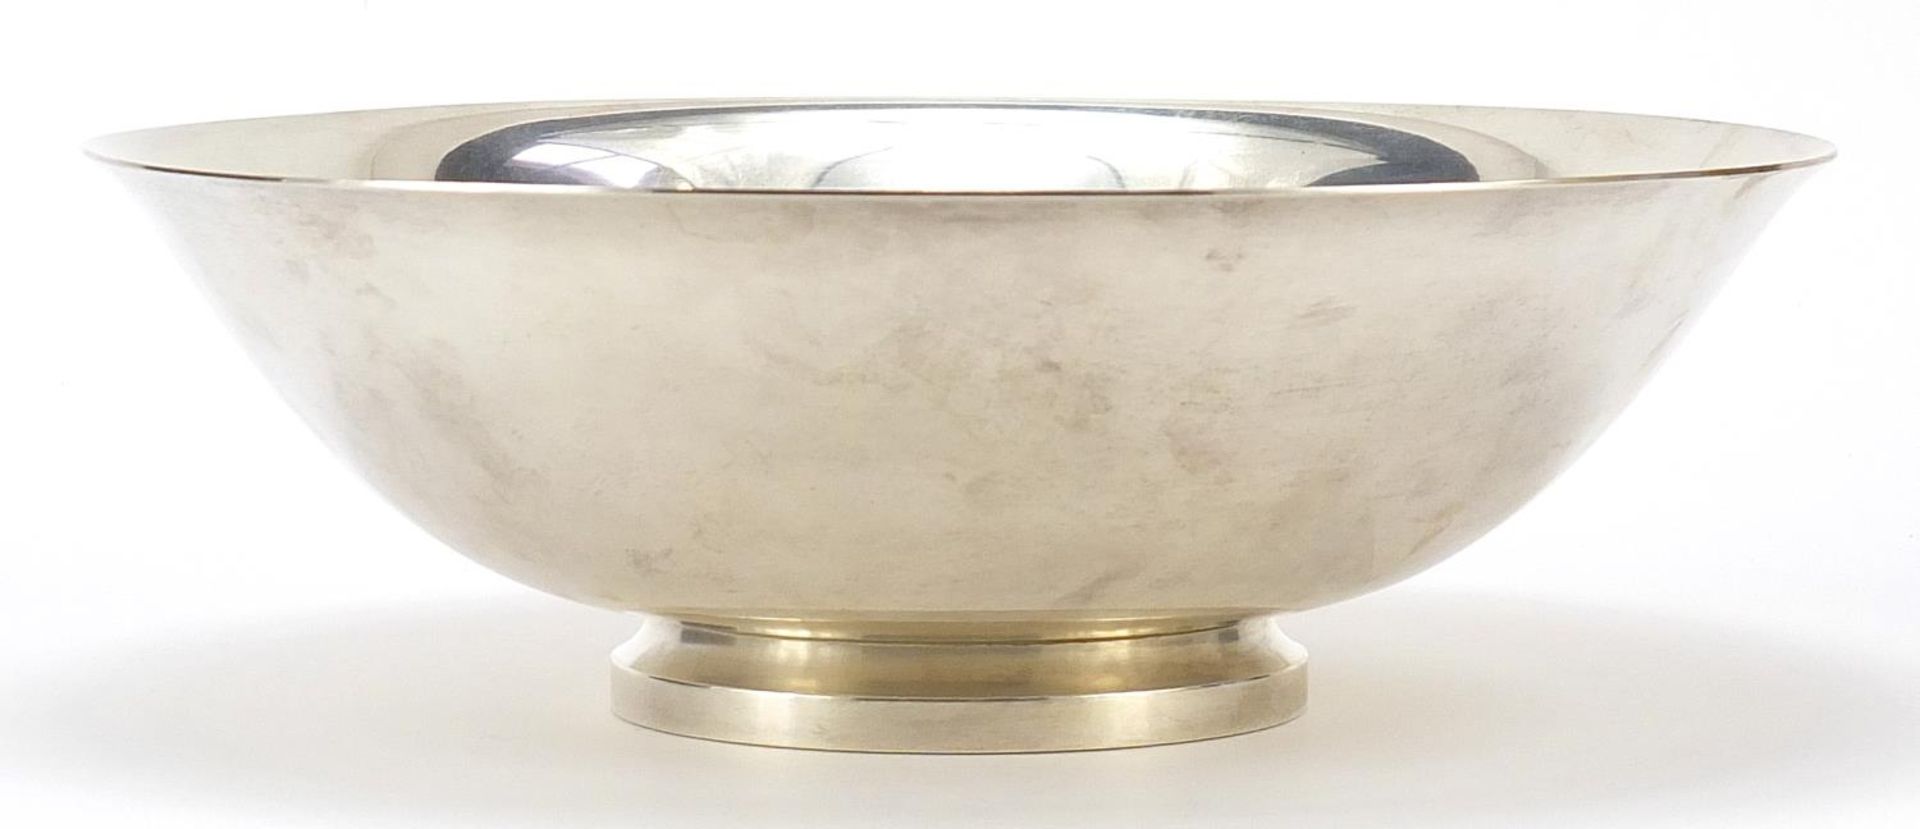 Gorham, sterling silver fruit bowl numbered 969, possibly retailed by Long's Jewellers &